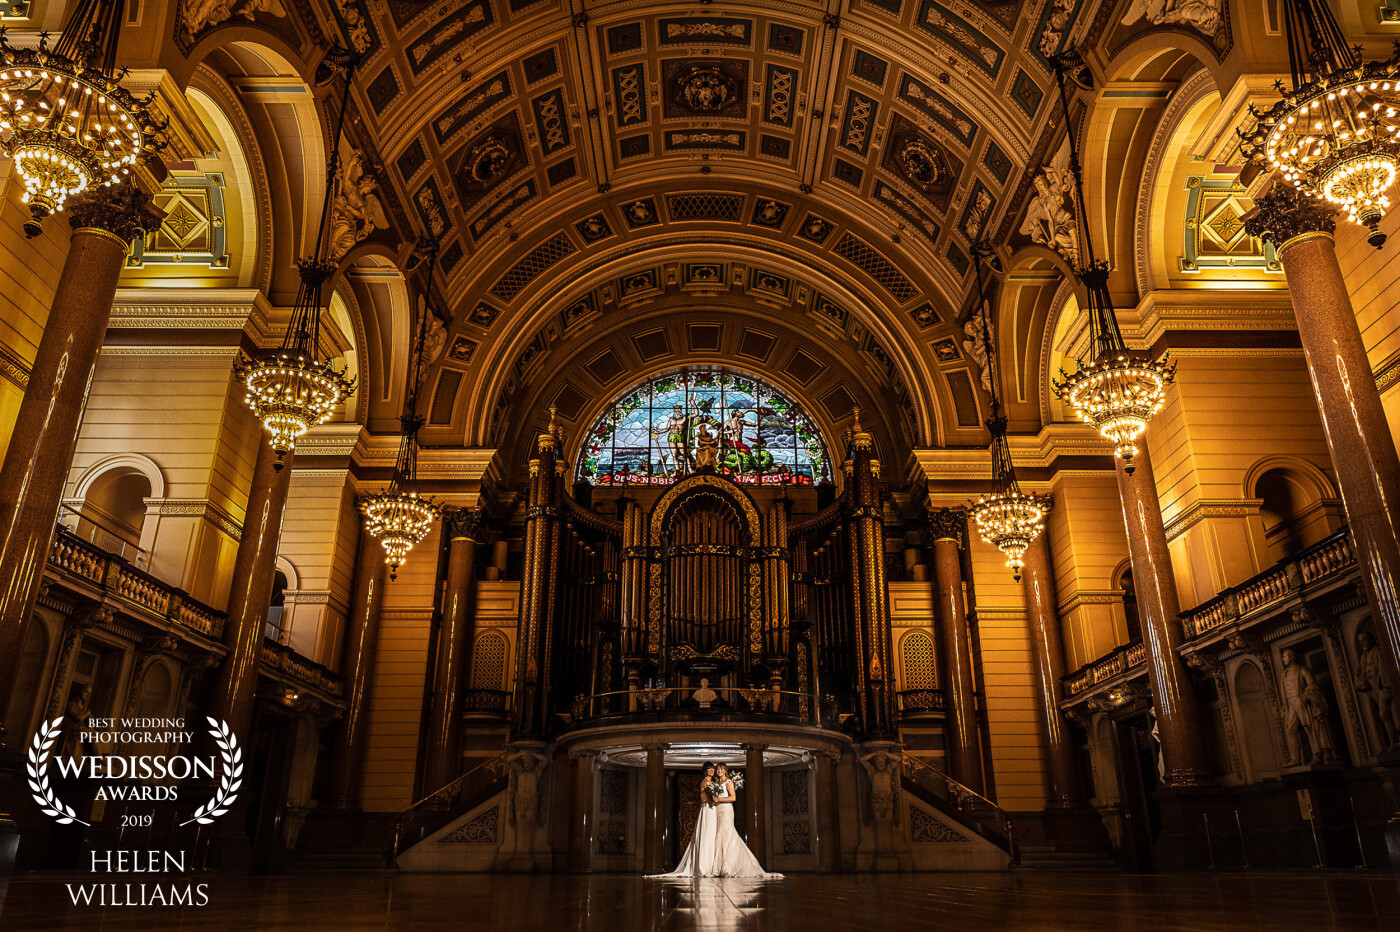 St George's Hall in Liverpool, UK is one the most beautiful venues I have ever shot at. This room, The Great Hall is regularly used for filming TV and film productions.  This space in particular was used for Fantastic Beasts and where to find them. A lot of wedding photographers prefer to shoot on the upper balconies that are bathed in natural light. The floor level here has no windows and more difficult to shoot, which is why i love it so much. As soon as i saw the stained glass, organ and beautiful chandeliers there was no way I was going to stay on the balcony and get the 'safe' shot. I took this using two AD200's. The first placed directly behind the brides pointing upwards to seperate them from the background and a second light camera right with grid to light the brides. This was edited out in post.   